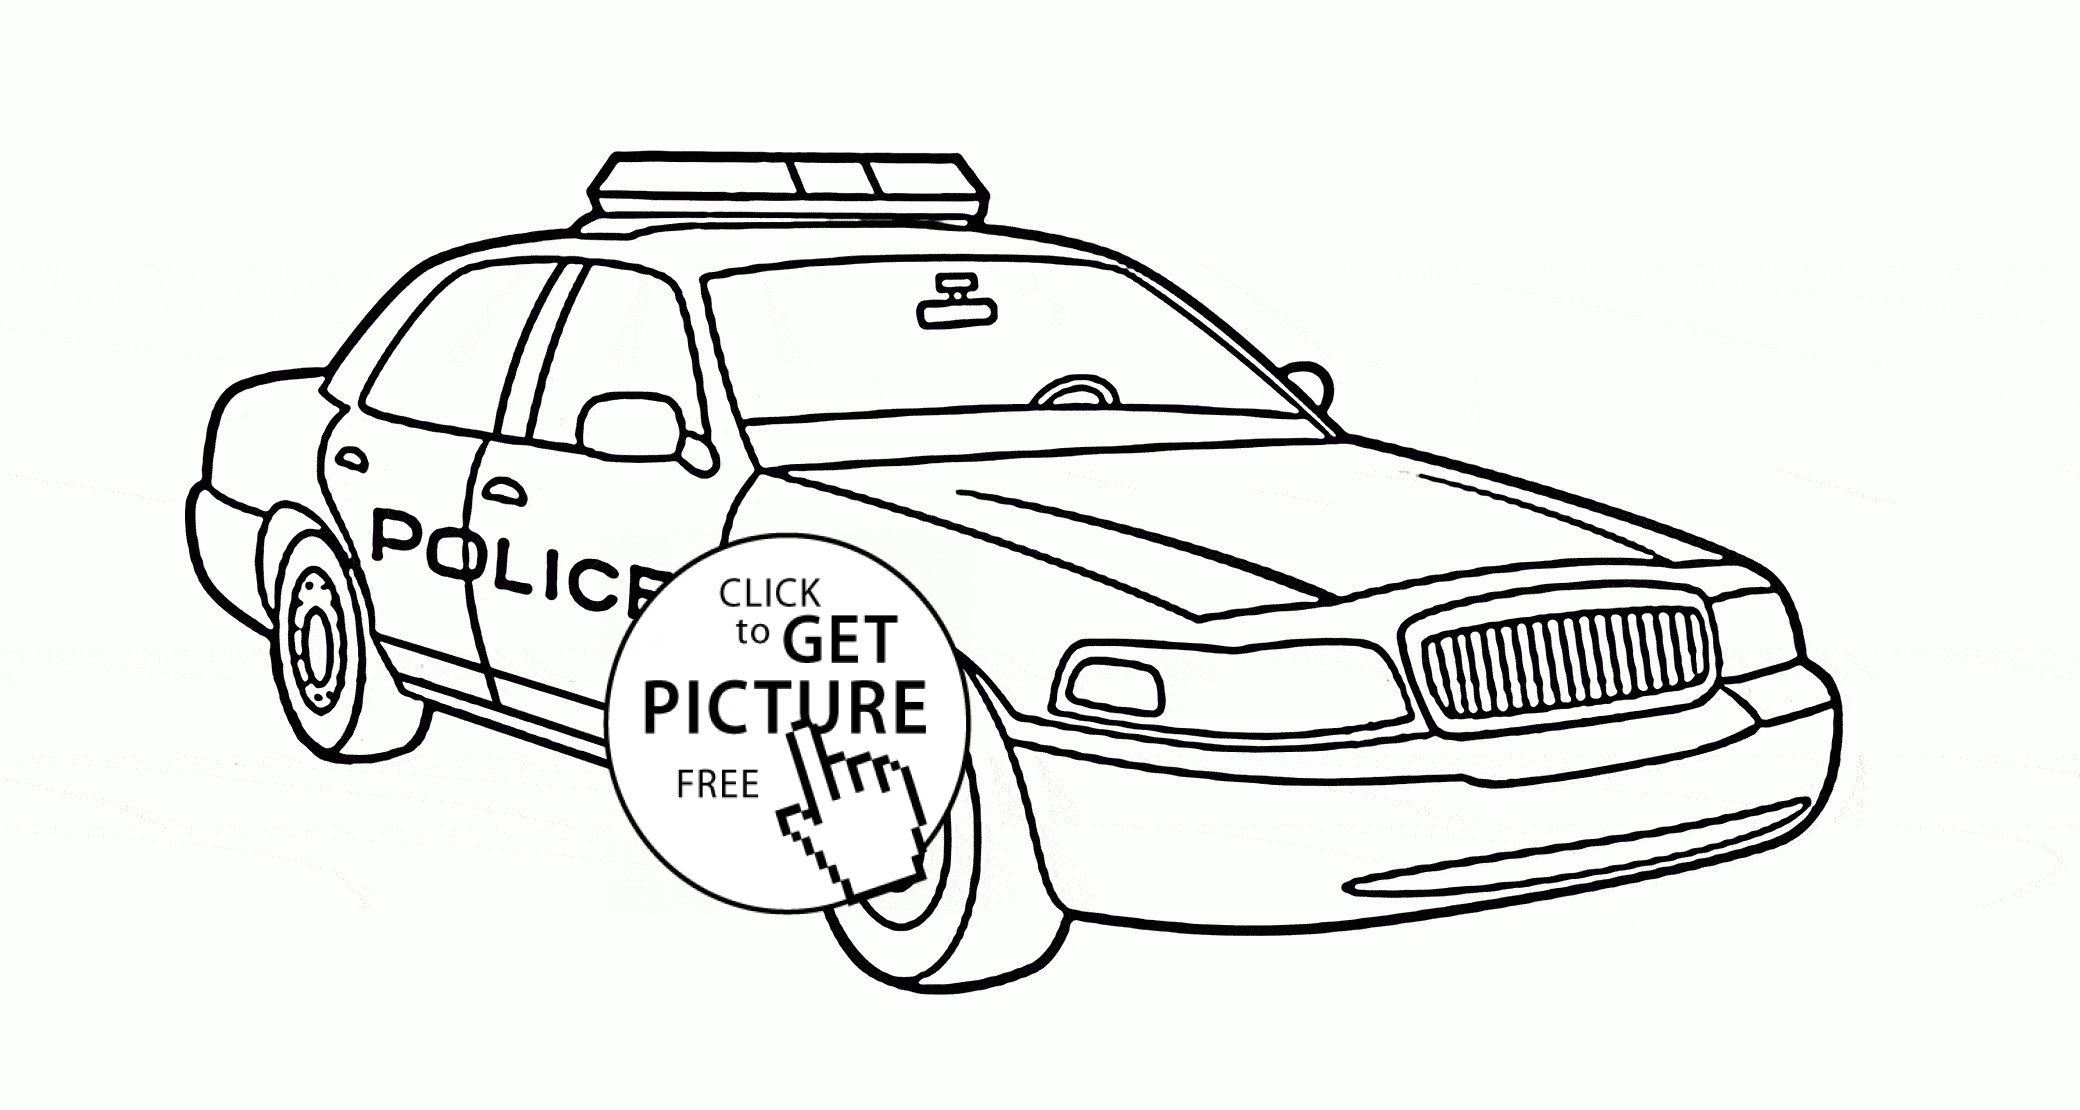 Real Police Car coloring page for kids, transportation coloring ...